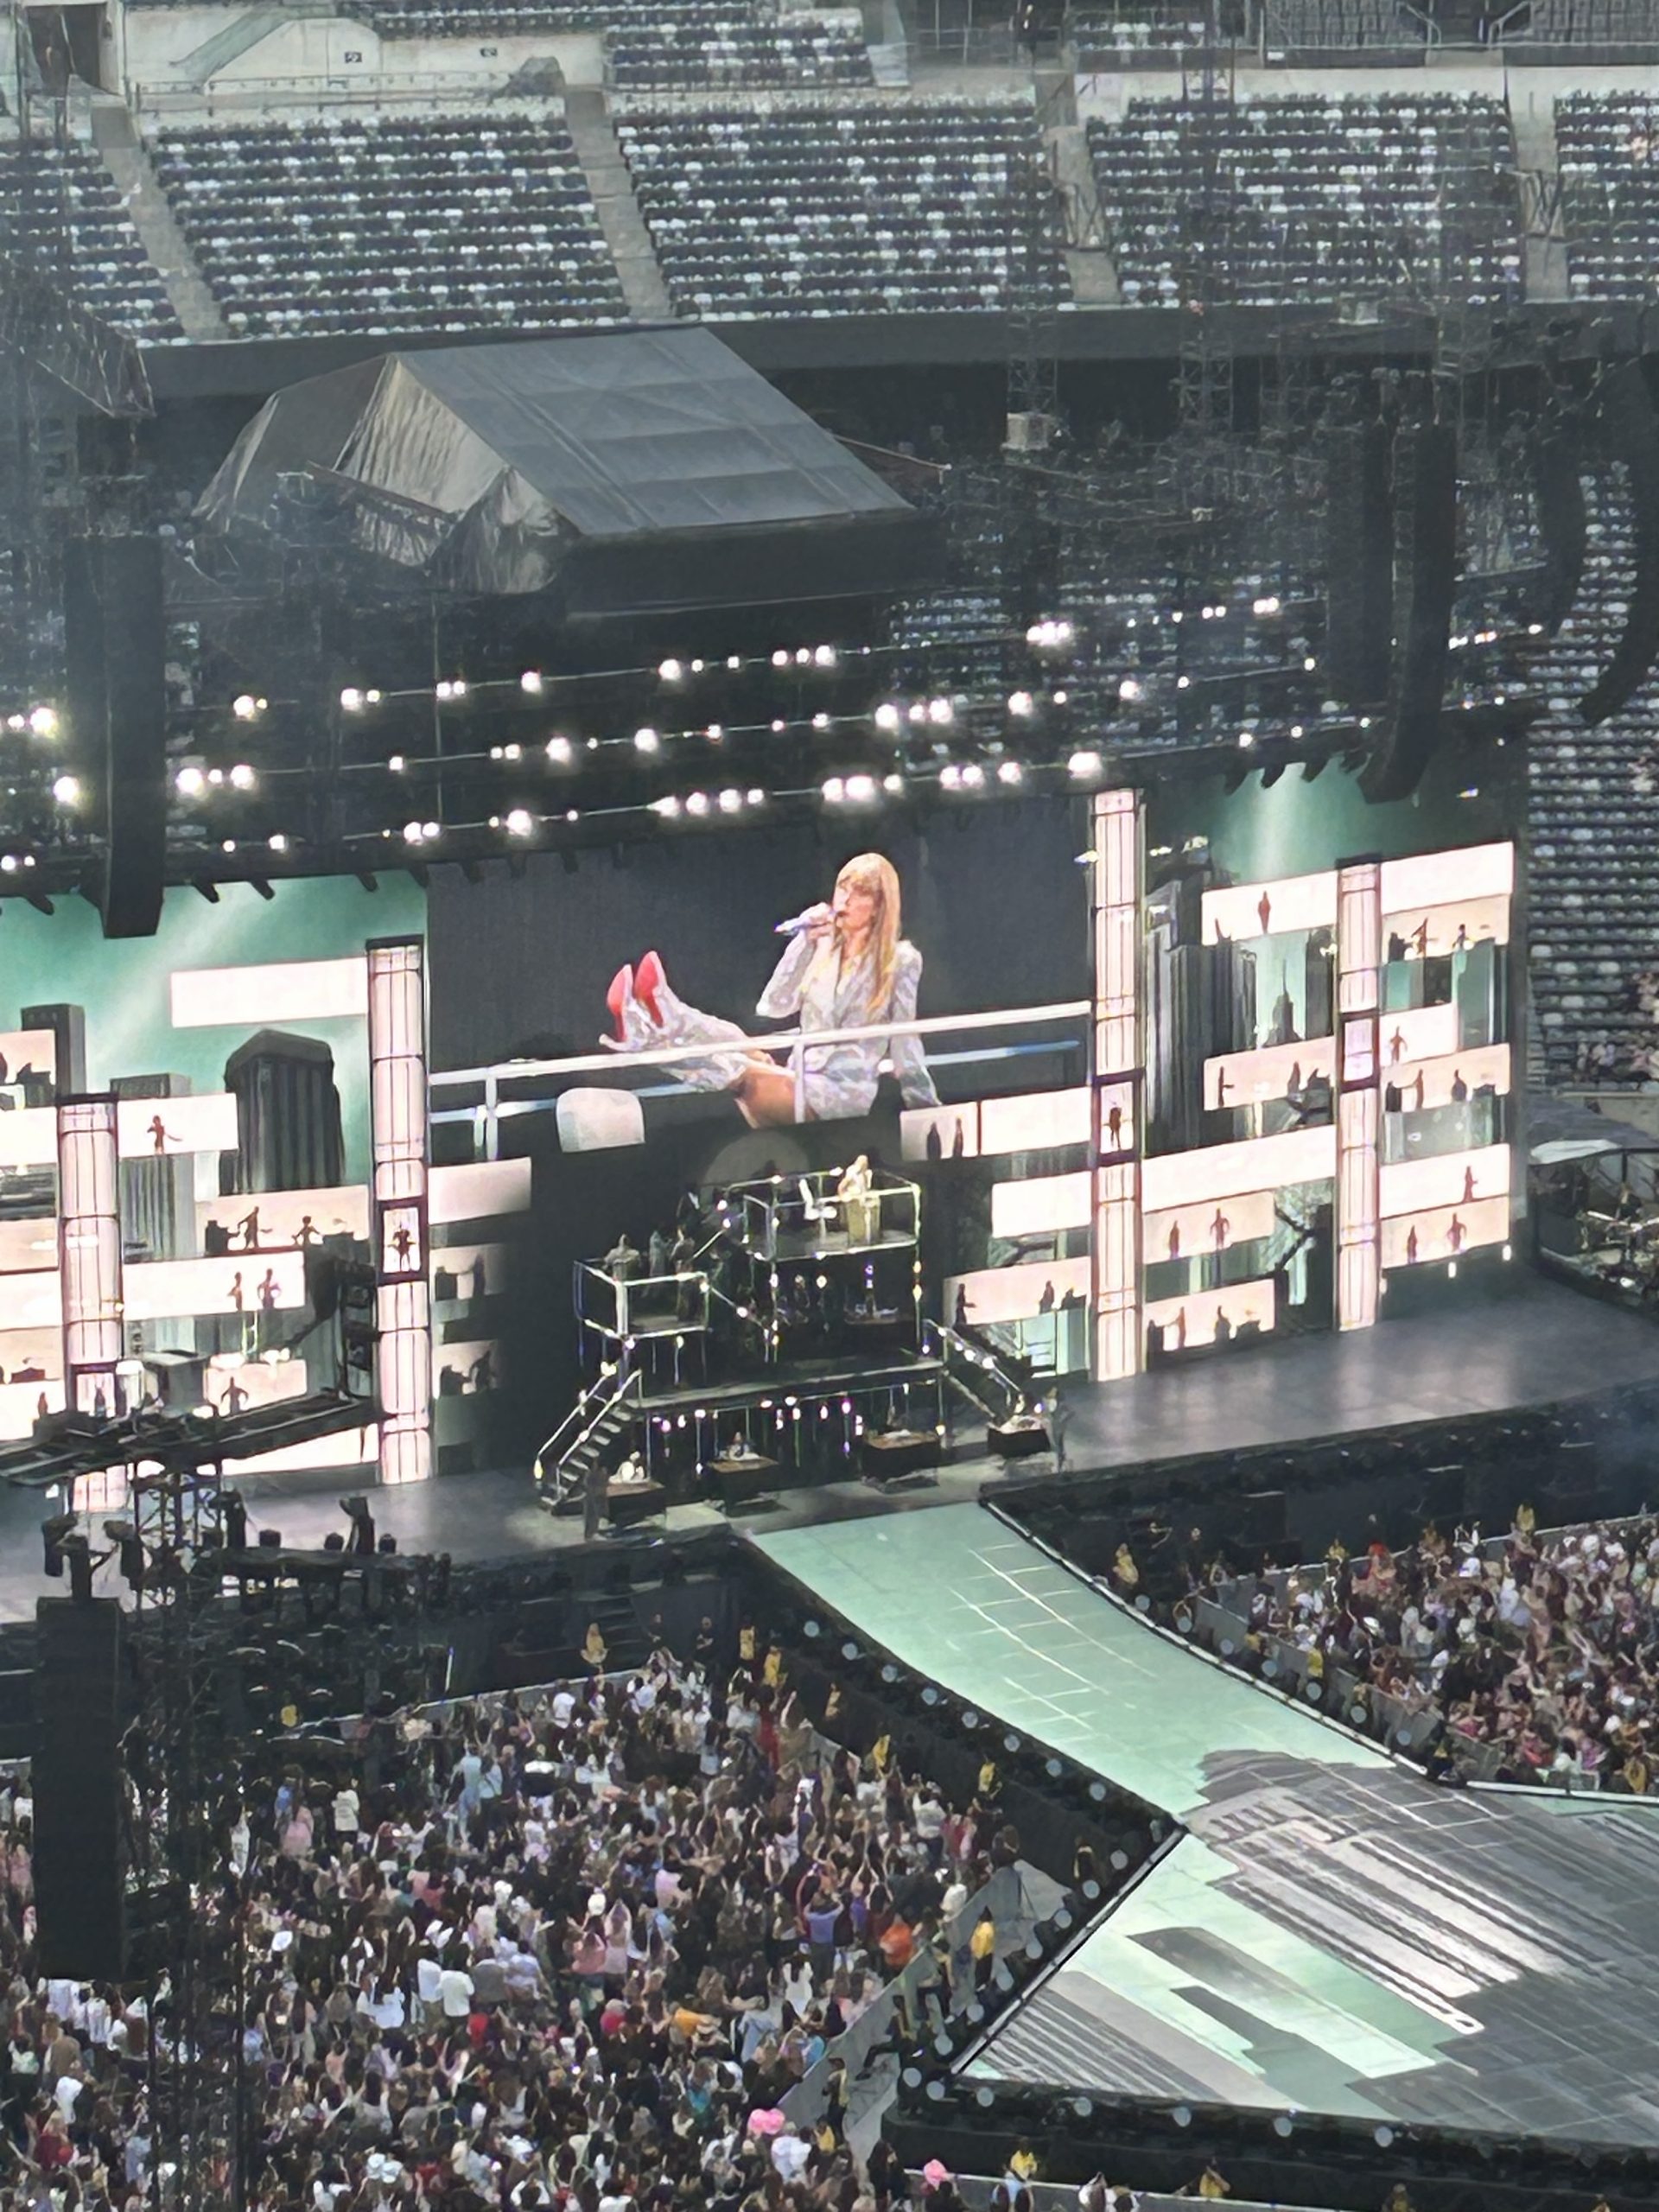 Taylor+Swift+poses+during+her+concert+in+Metlife+Stadium+while+singing+The+Man.++Hopefully%2C+Travis+Kelce+is+The+Man+for+Swift+because+we+love+the+relationship+between+the+two.